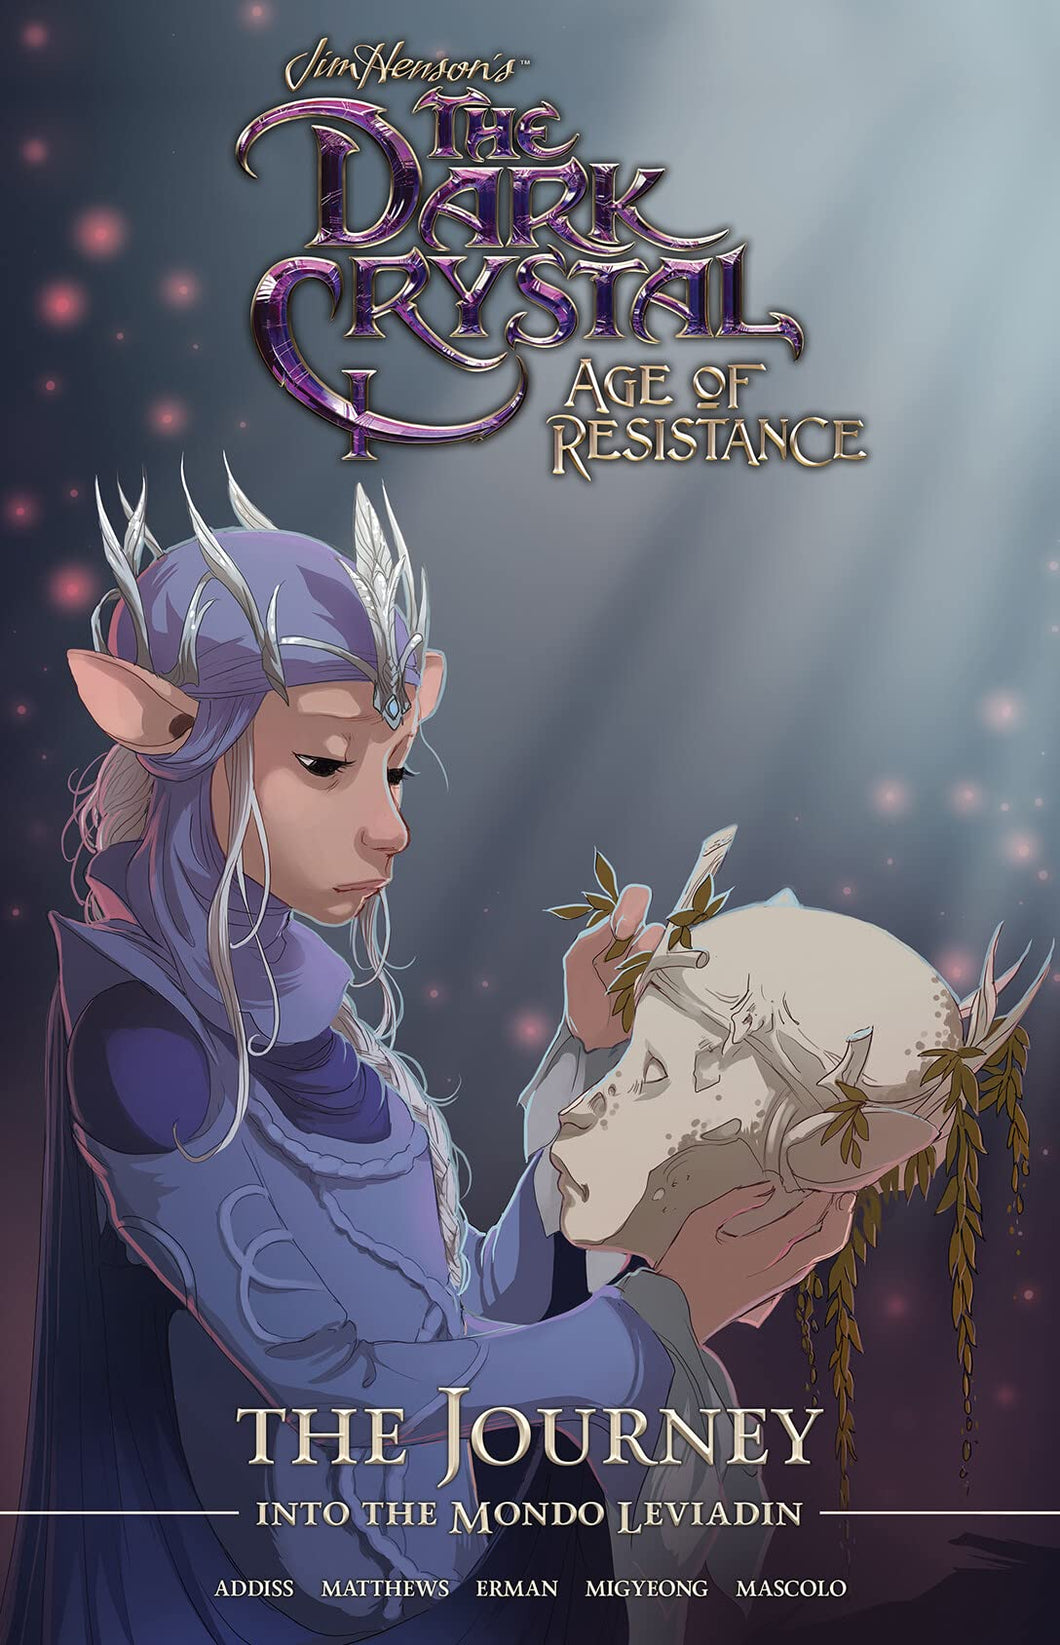 Jim Henson's The Dark Crystal: Age of Resistance: The Journey